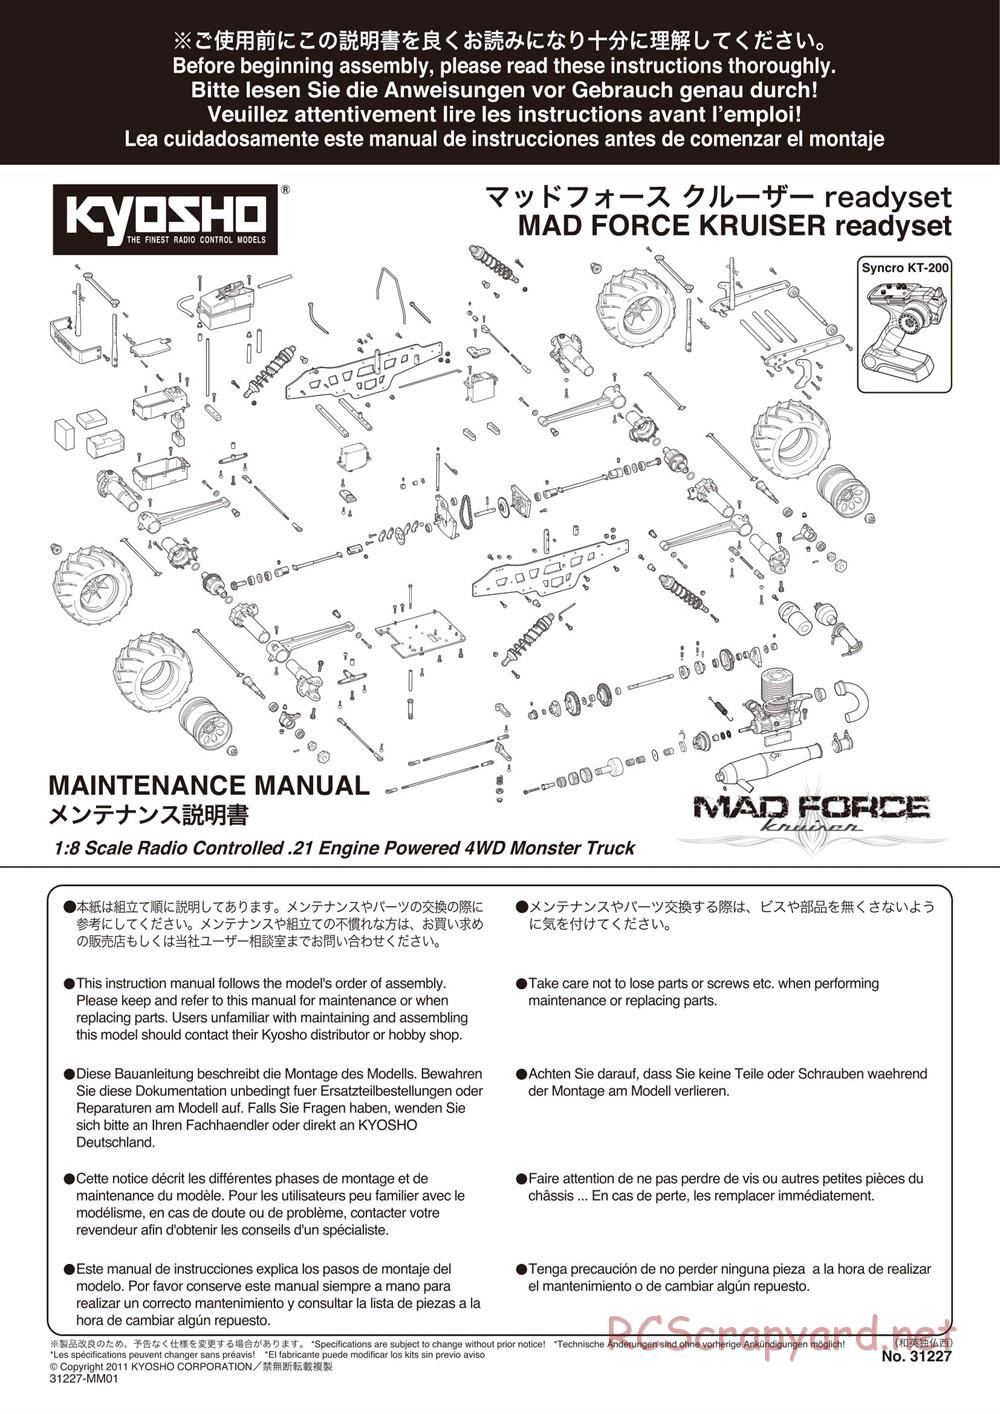 Kyosho - Mad Force Cruiser - Manual - Page 1